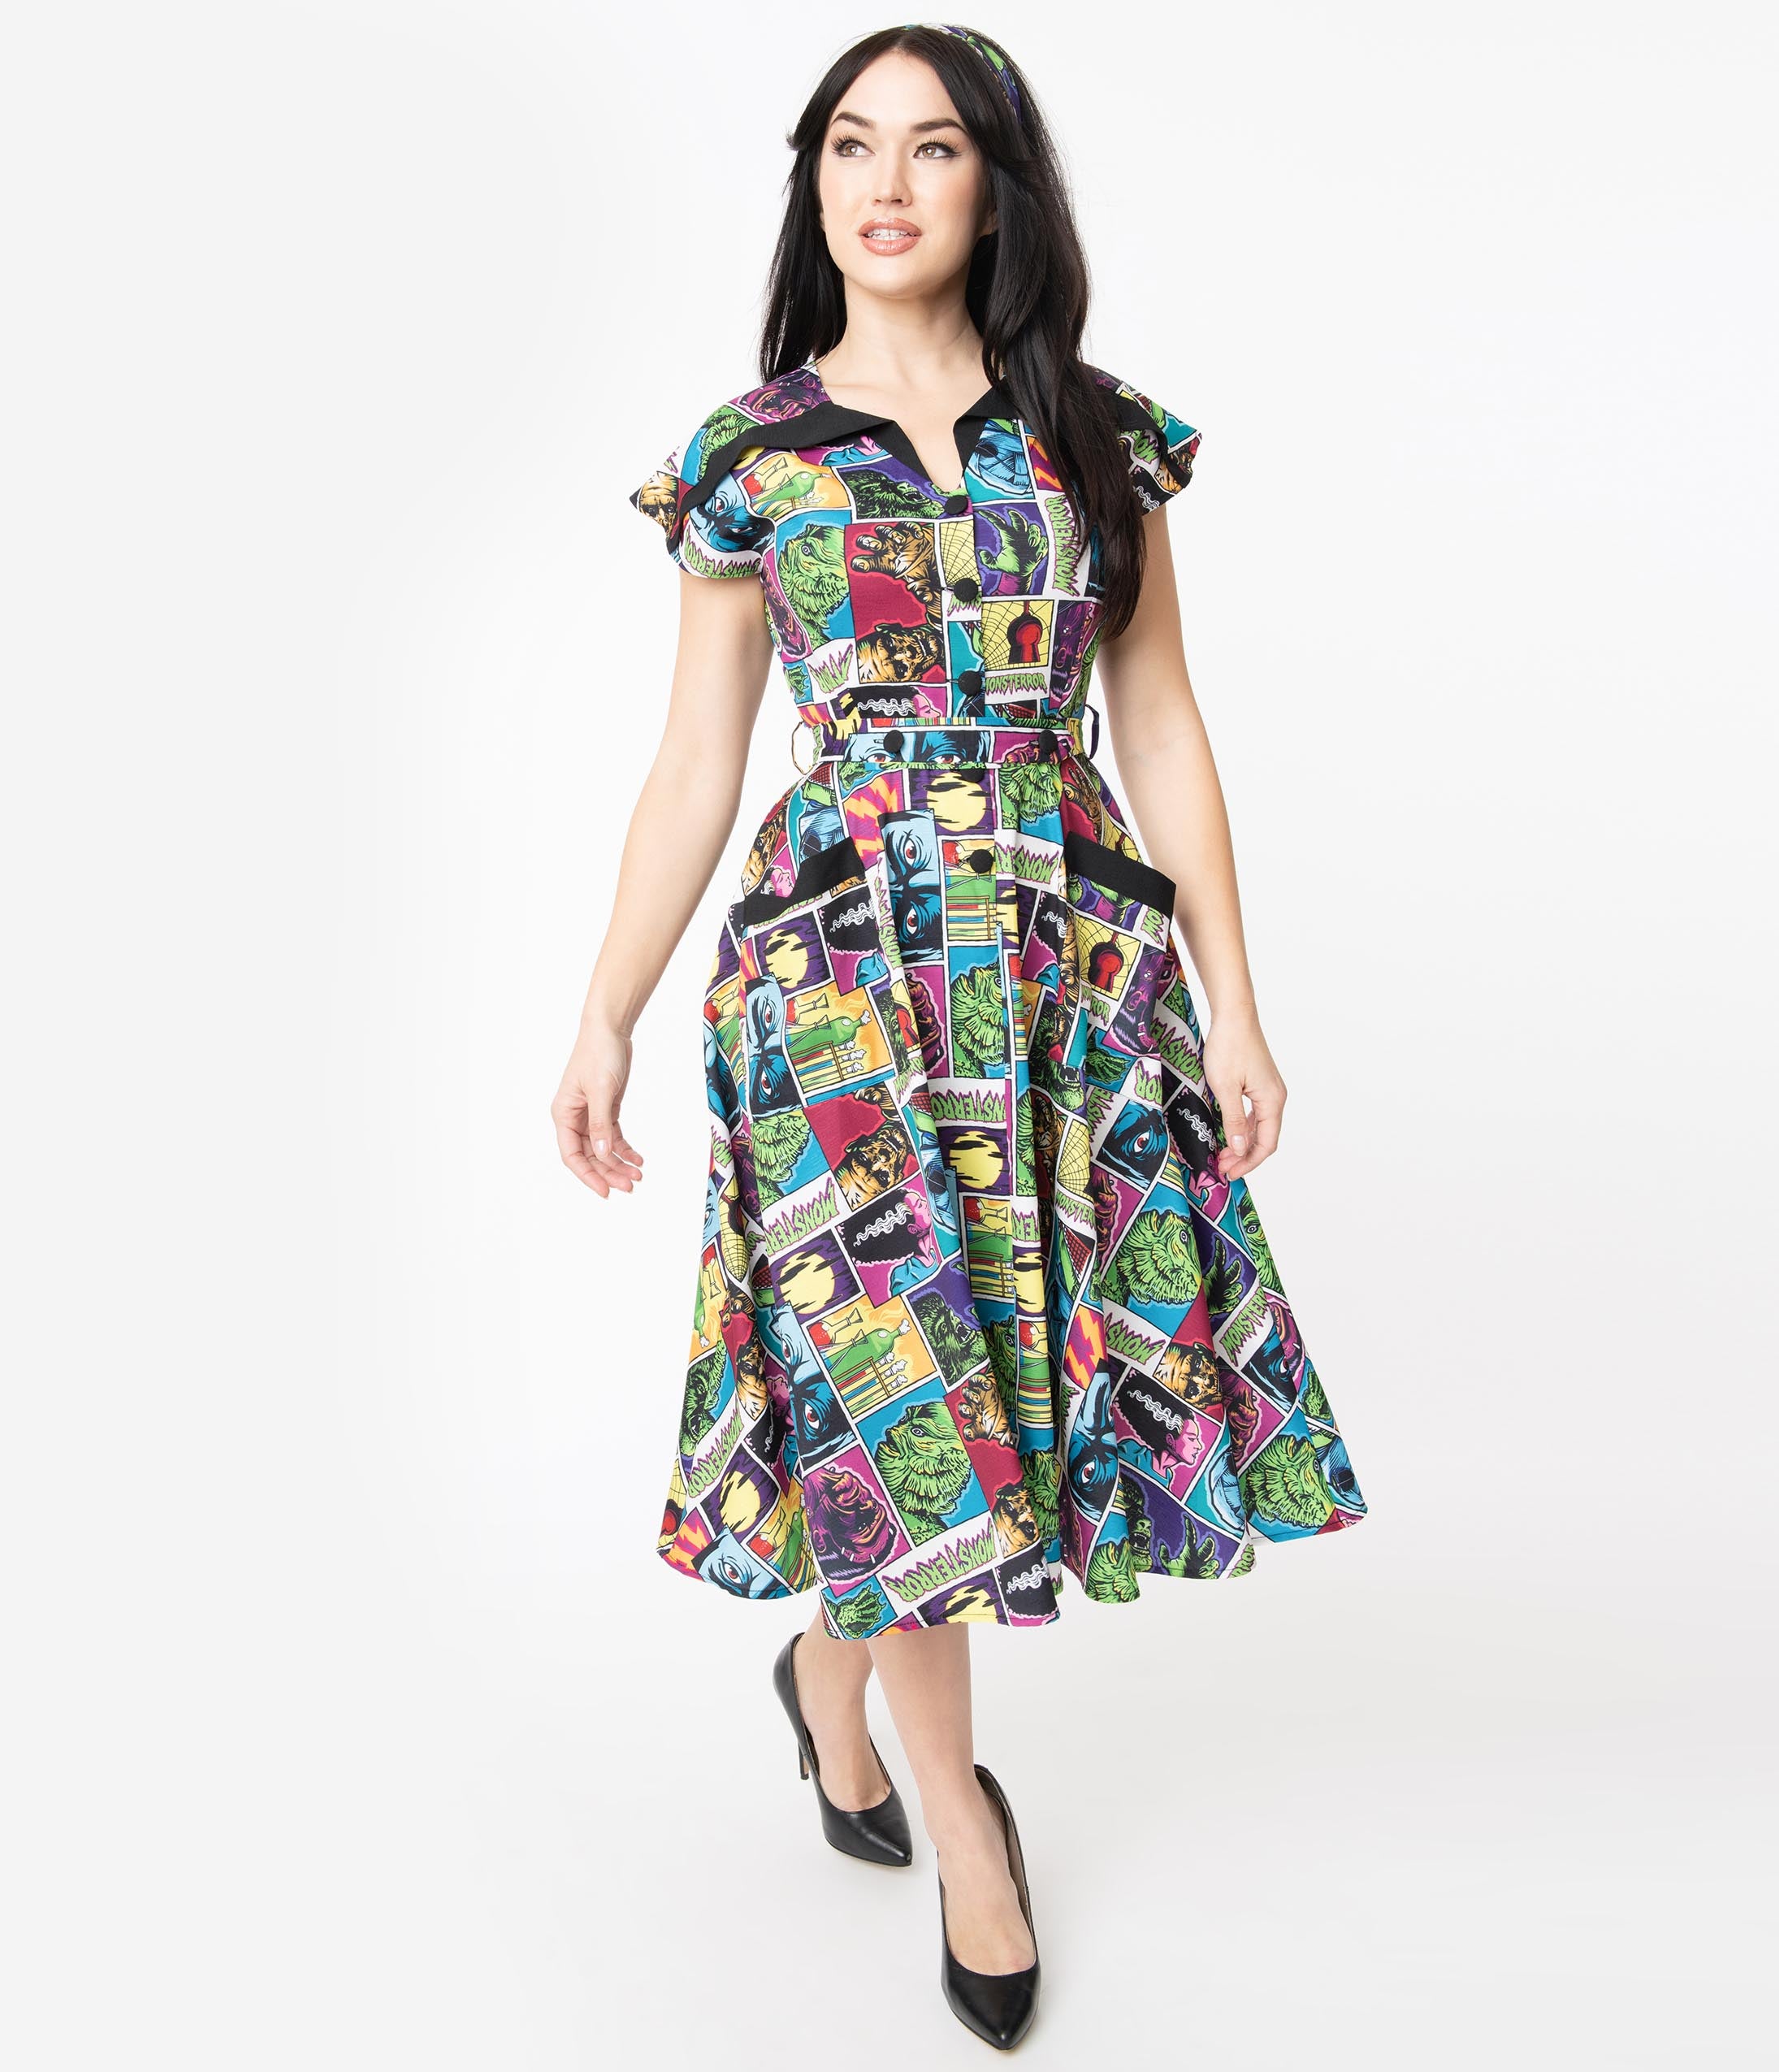 This is a Universal Monsters Hedda dress from Unique Vintage and it has Creature From the Black Lagoon, Frankenstein, Dracula, Mummy, Bride and Wolfman and has a black collar and two pockets and the model is wearing black shoes.